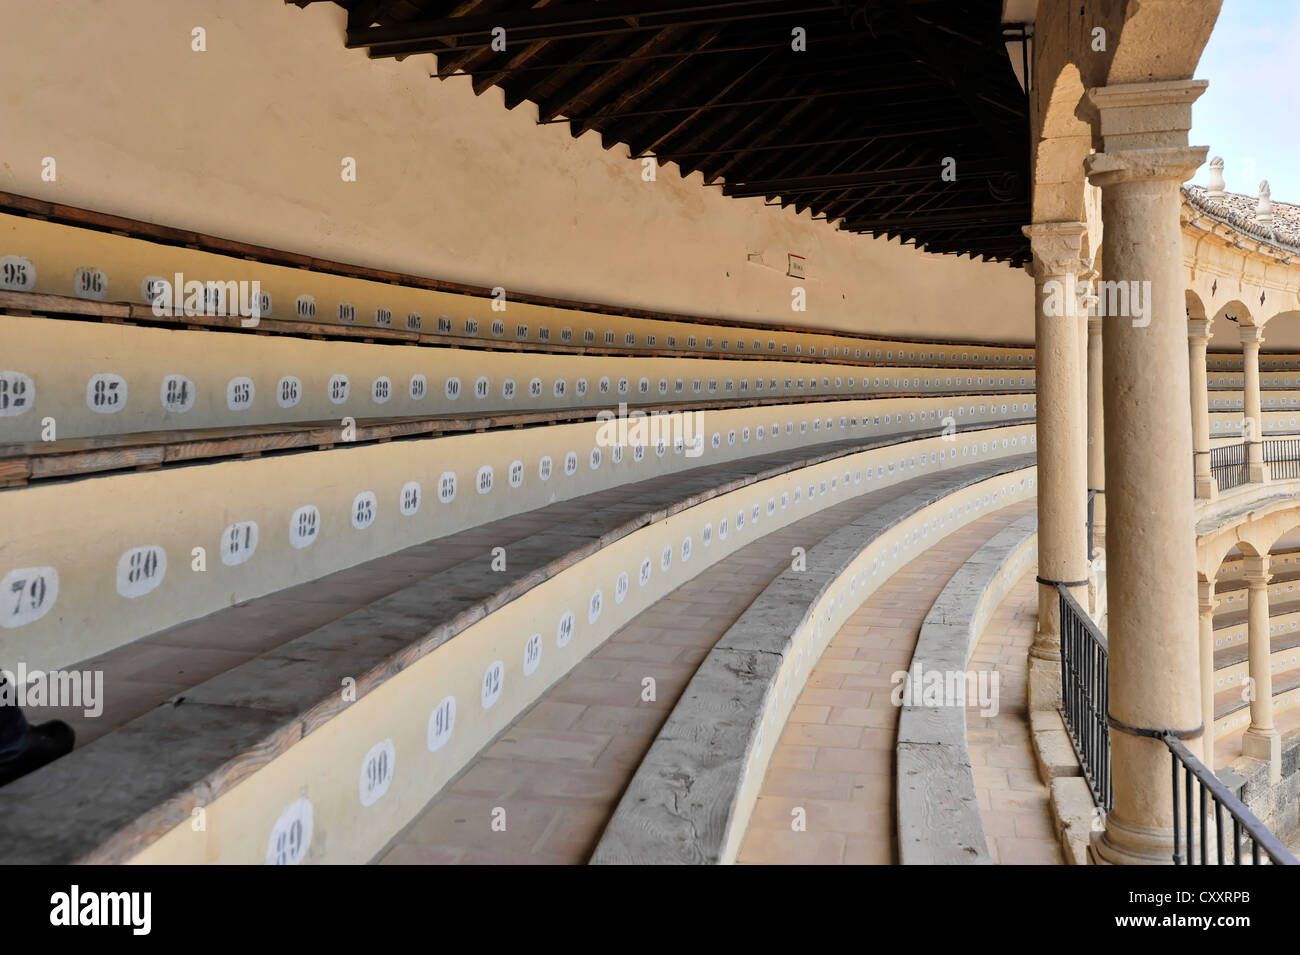 Seat numbers in the bullring of Ronda, Plaza de Toros, Malaga province, Andalusia, Spain, Europe Stock Photo